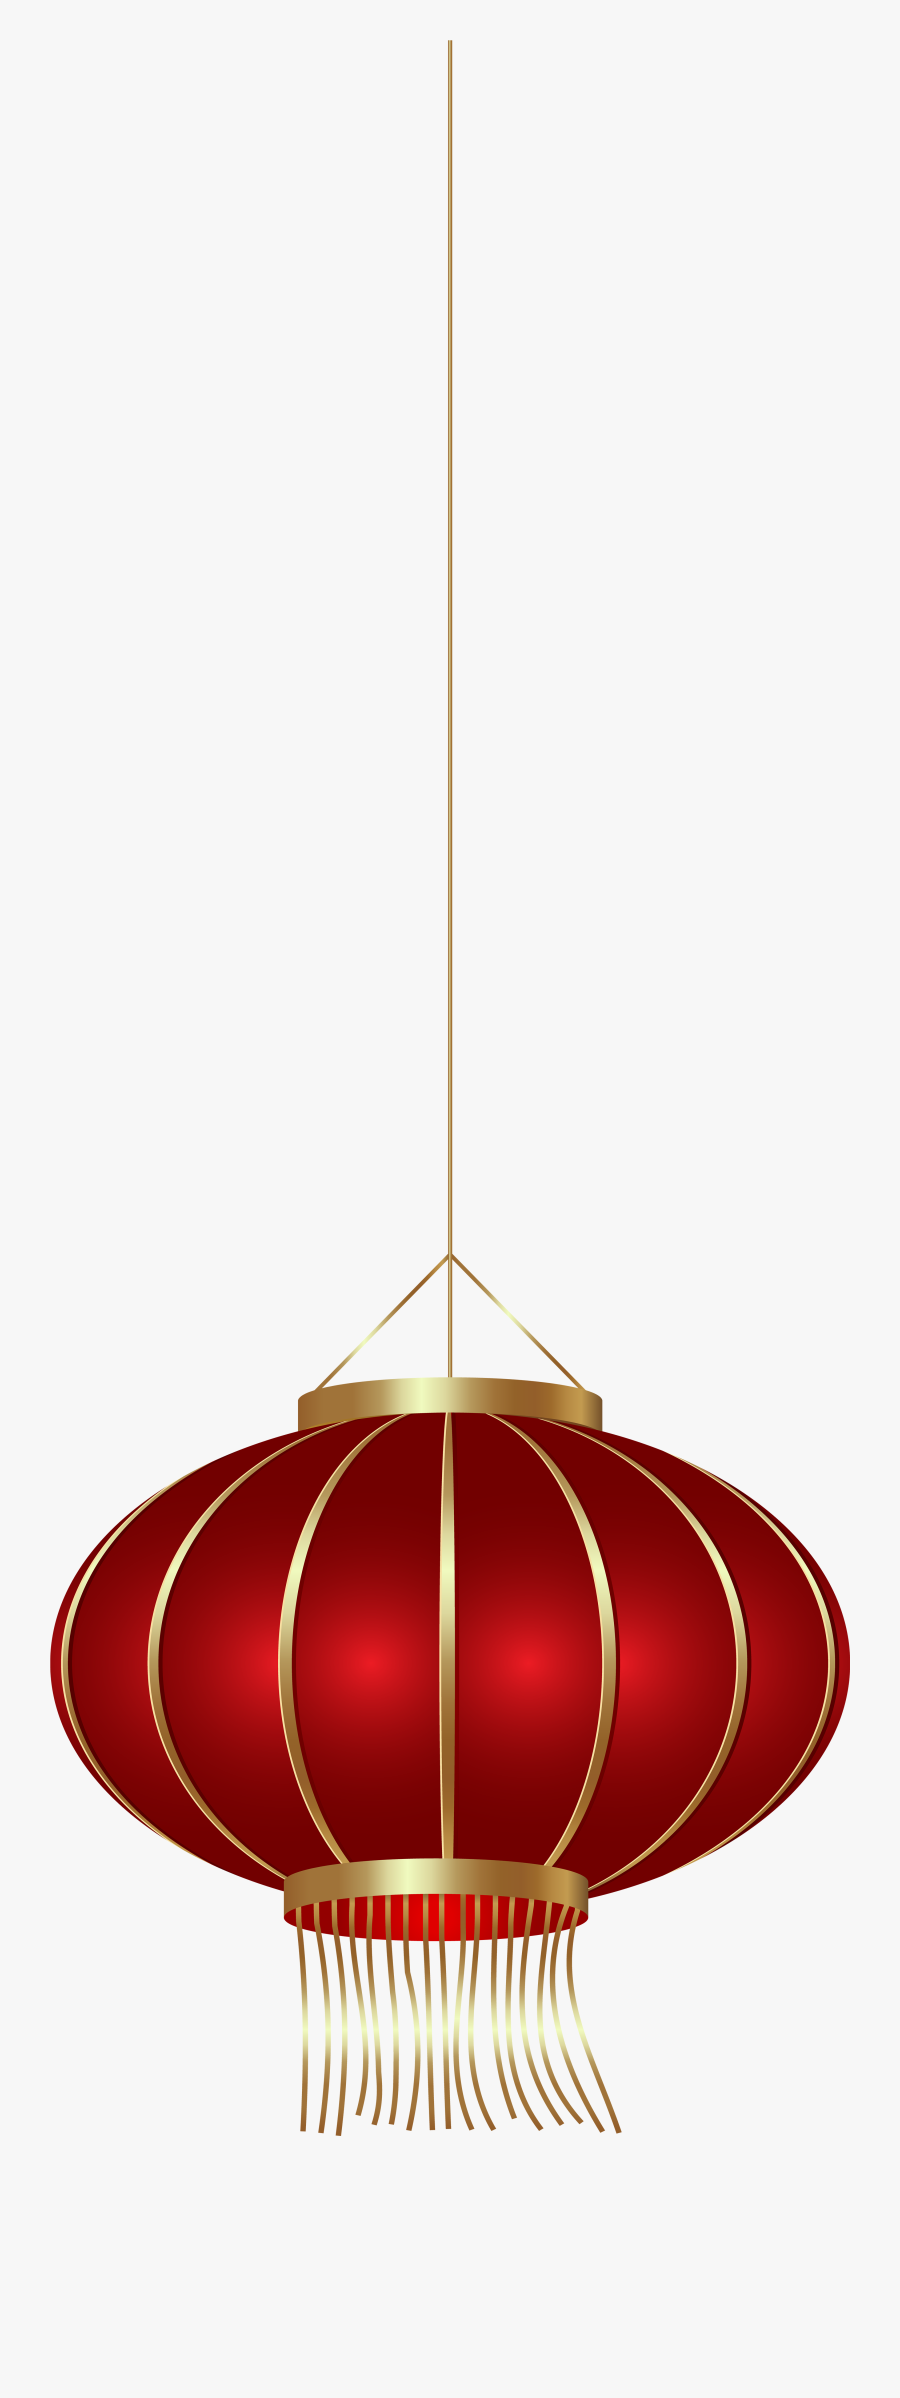 Large Chinese Lantern Png Clip Art - Lampshade, Transparent Clipart